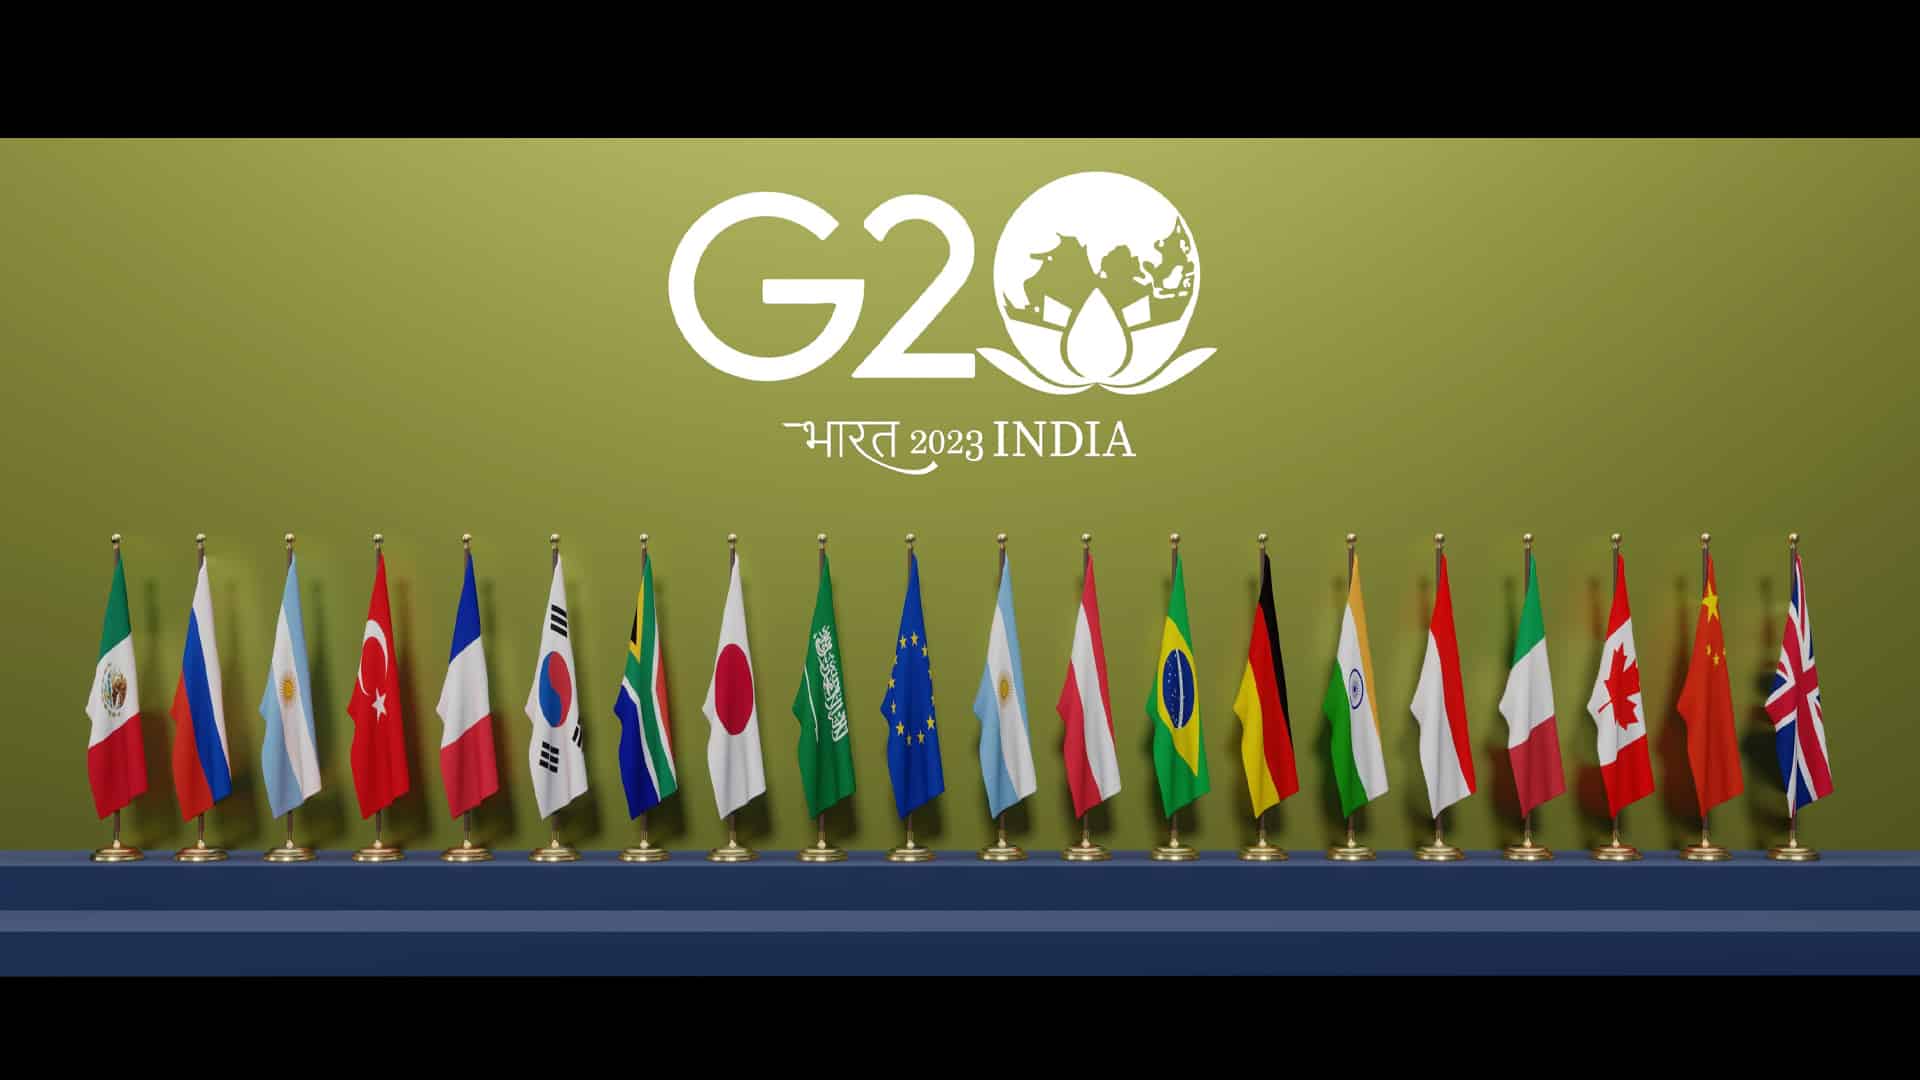 G-20 members stressed on increasing climate finance to help farmers take up adaptation measures: Agri secy